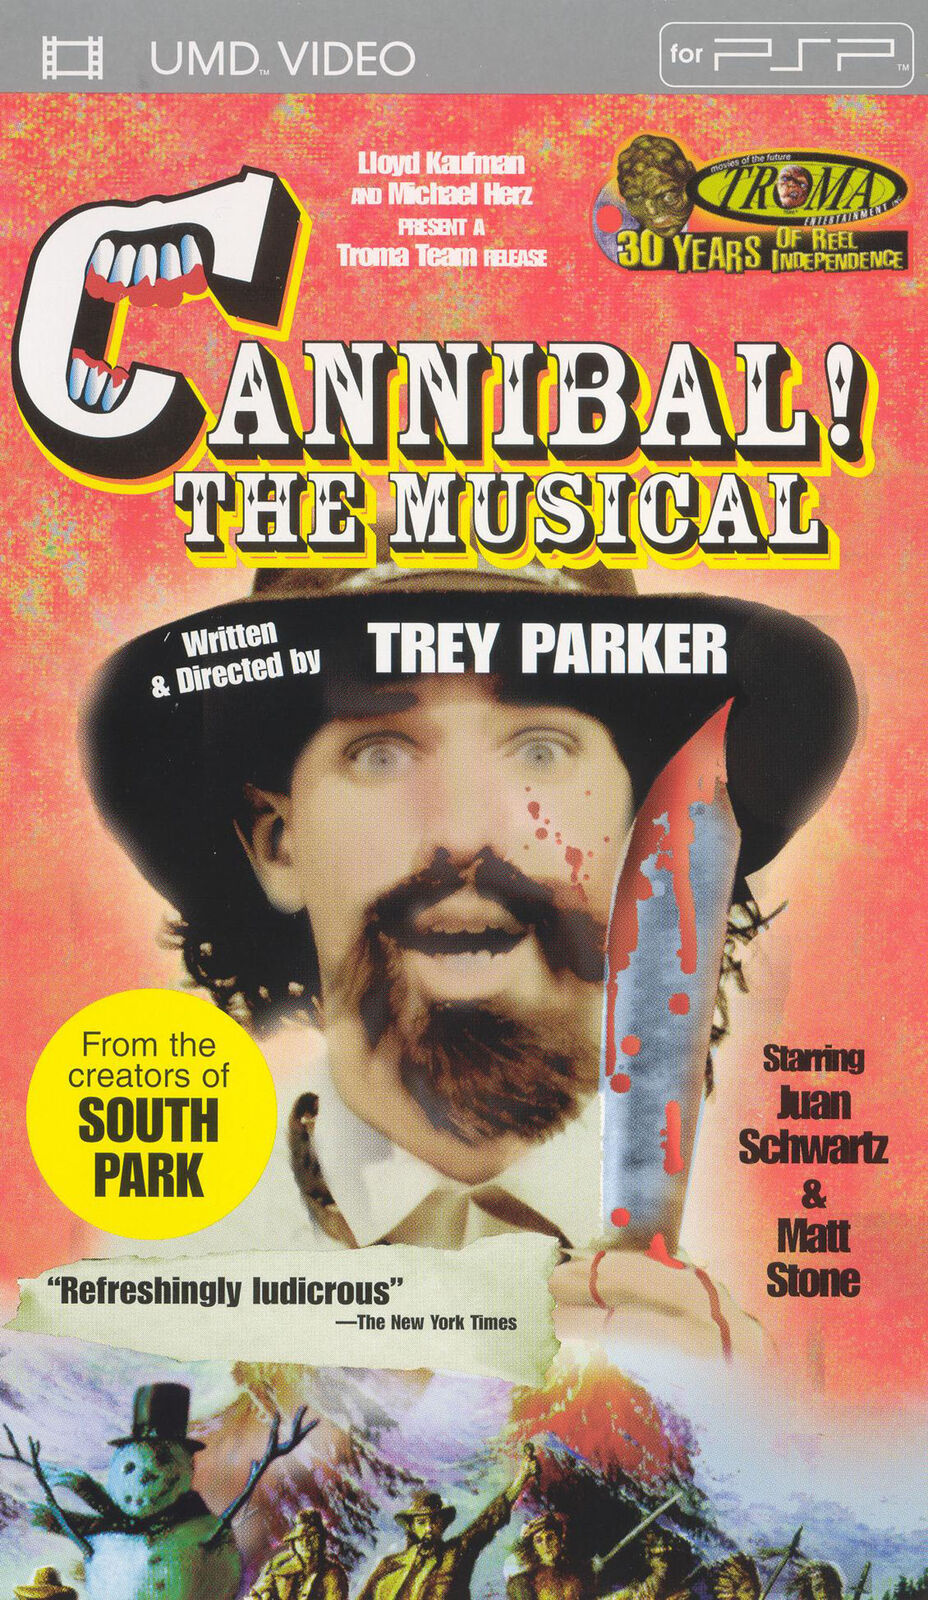 "Cannibal! The Musical" UMD Video